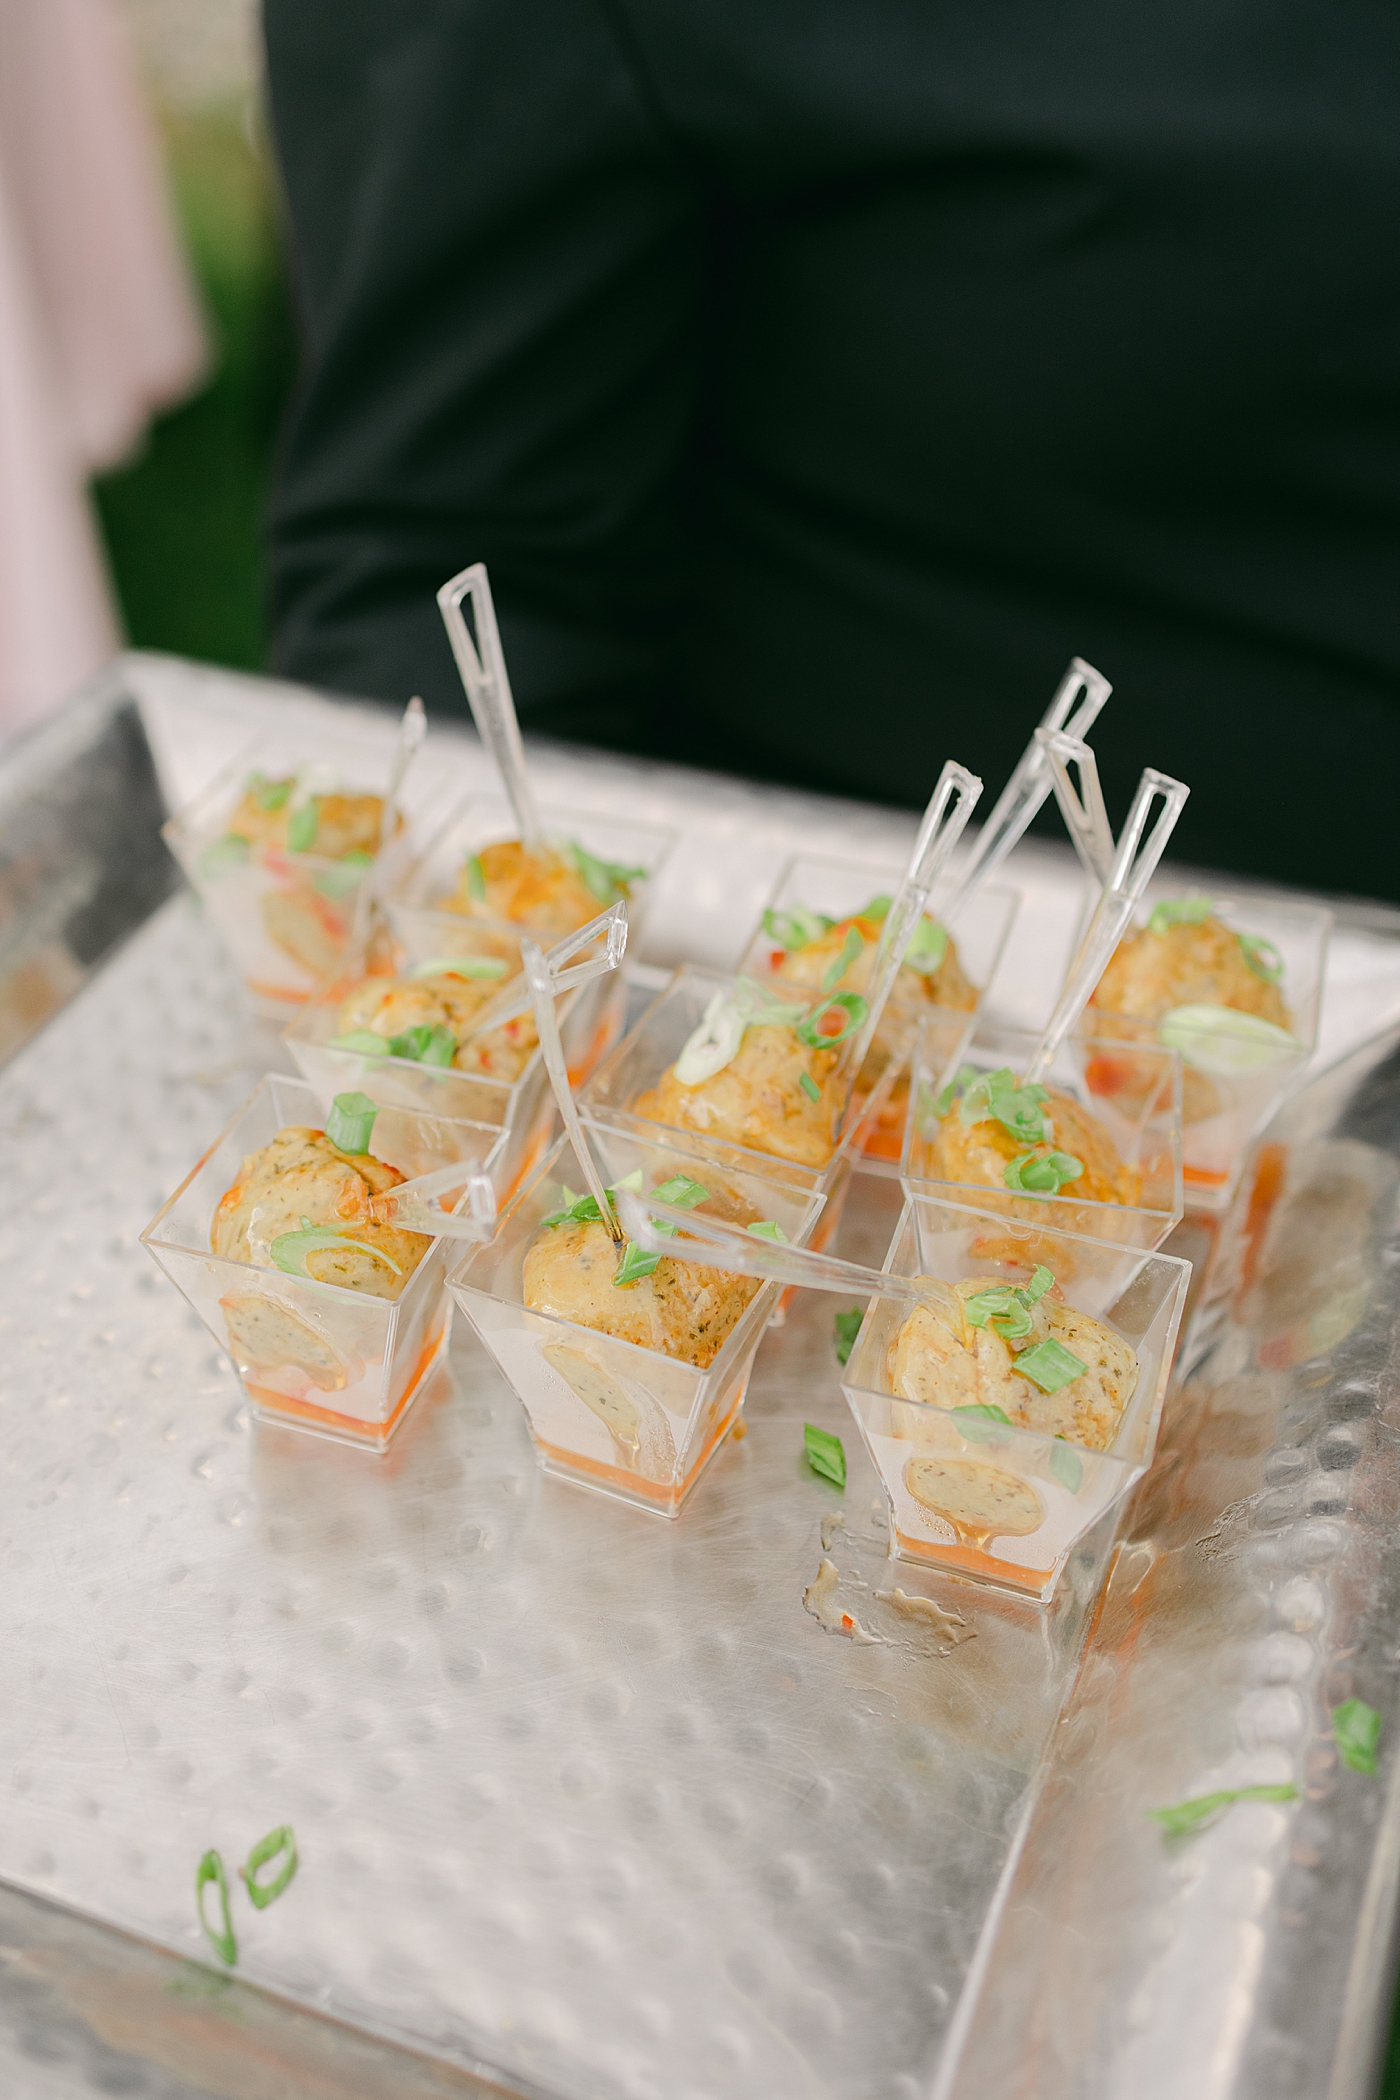 Reception food details | Image by Hope Helmuth Photography